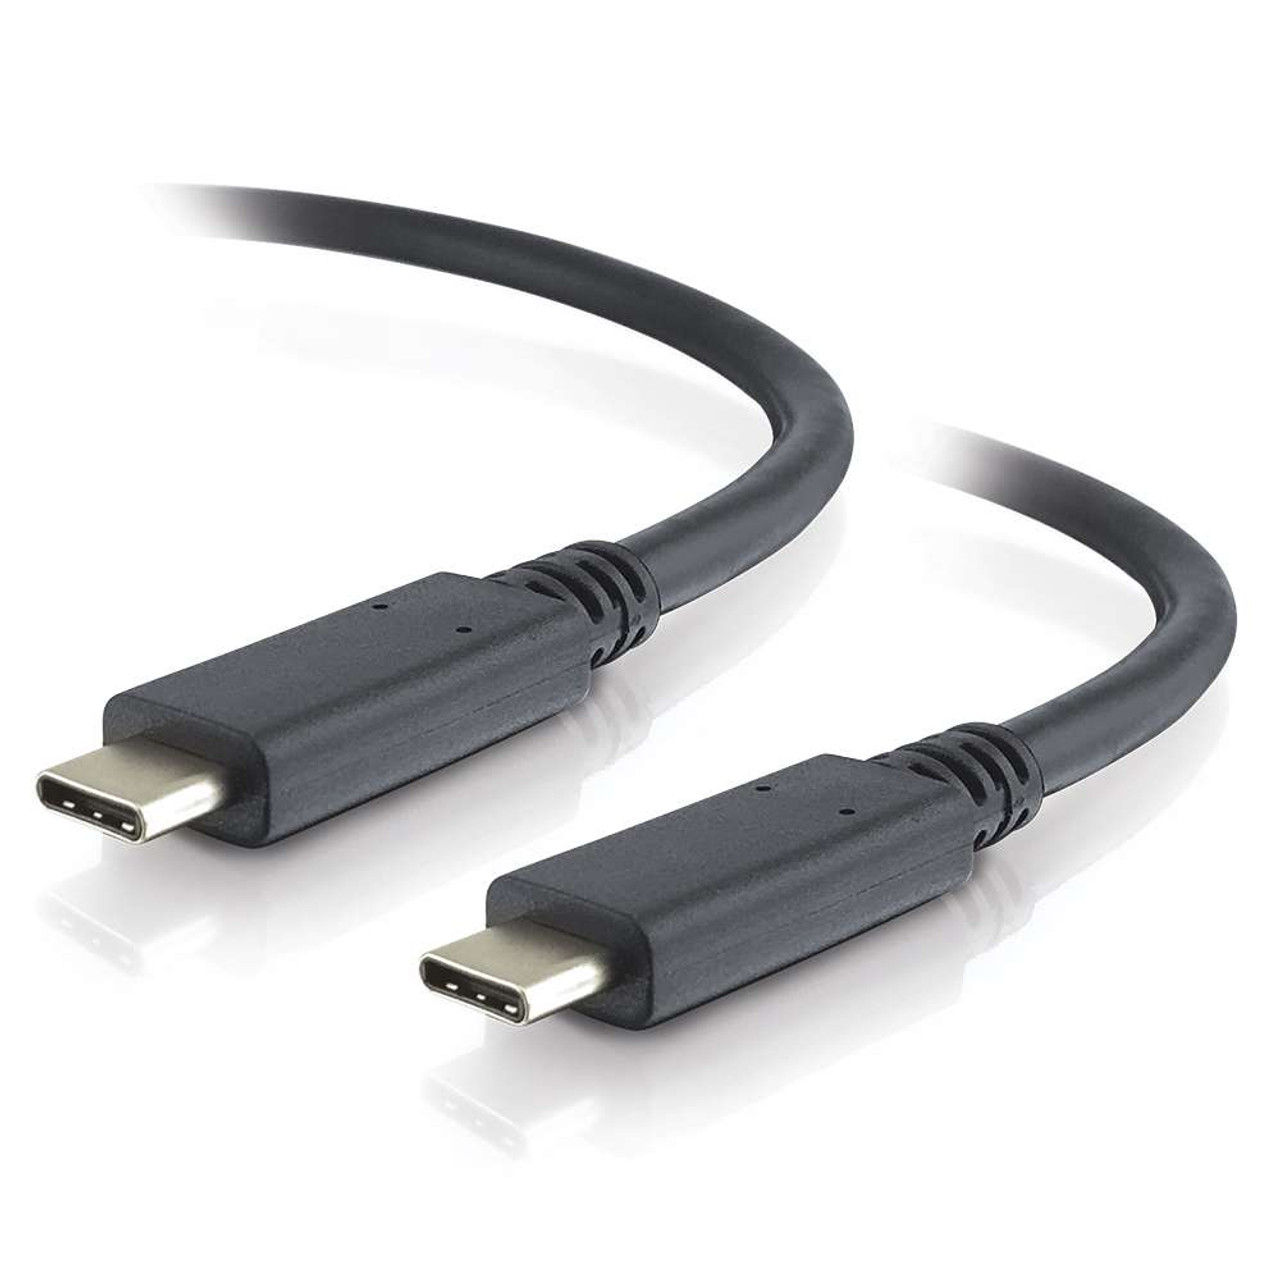 1m USB-C 3.1 Male Male Cable | Cables